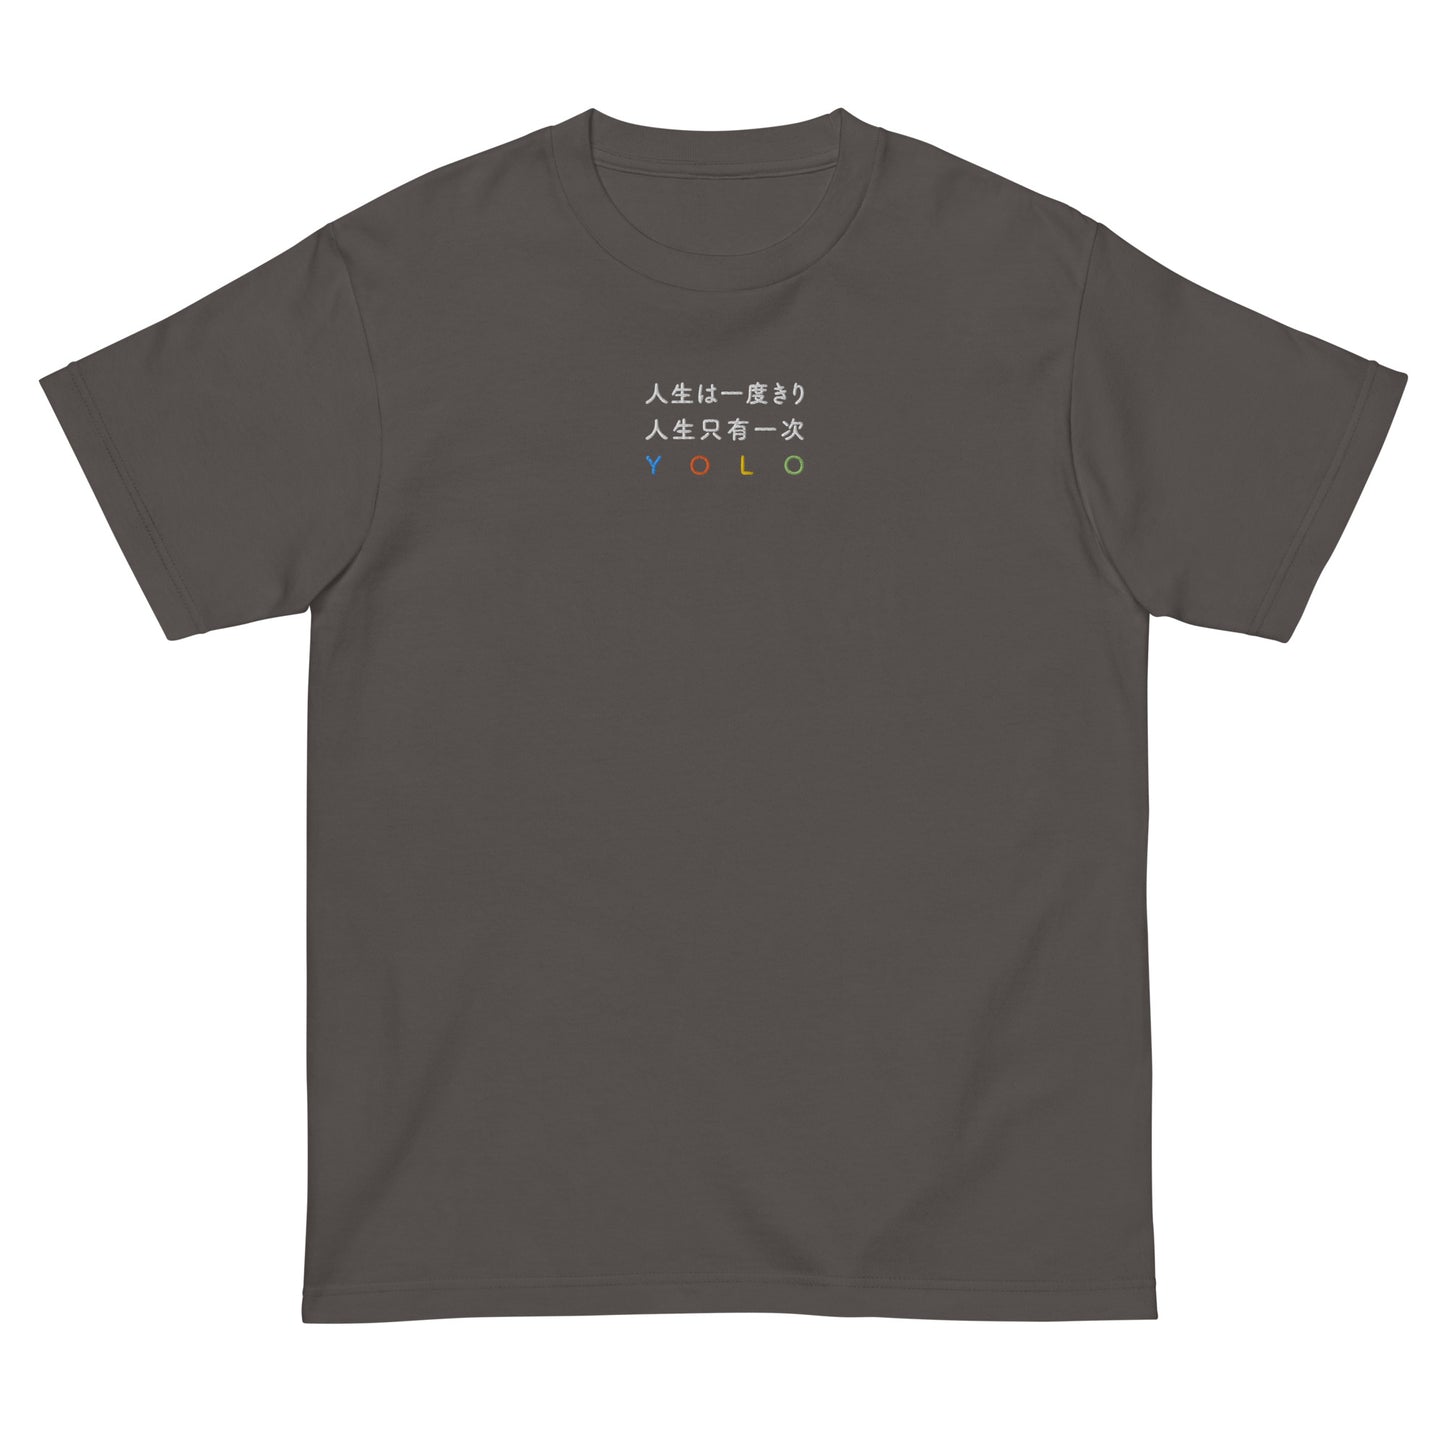 Dark Gray High Quality Tee - Front Design with an White, Light Blue, Orange, Yellow, Light Green Embroidery "YOLO" in Japanese,Chinese and English